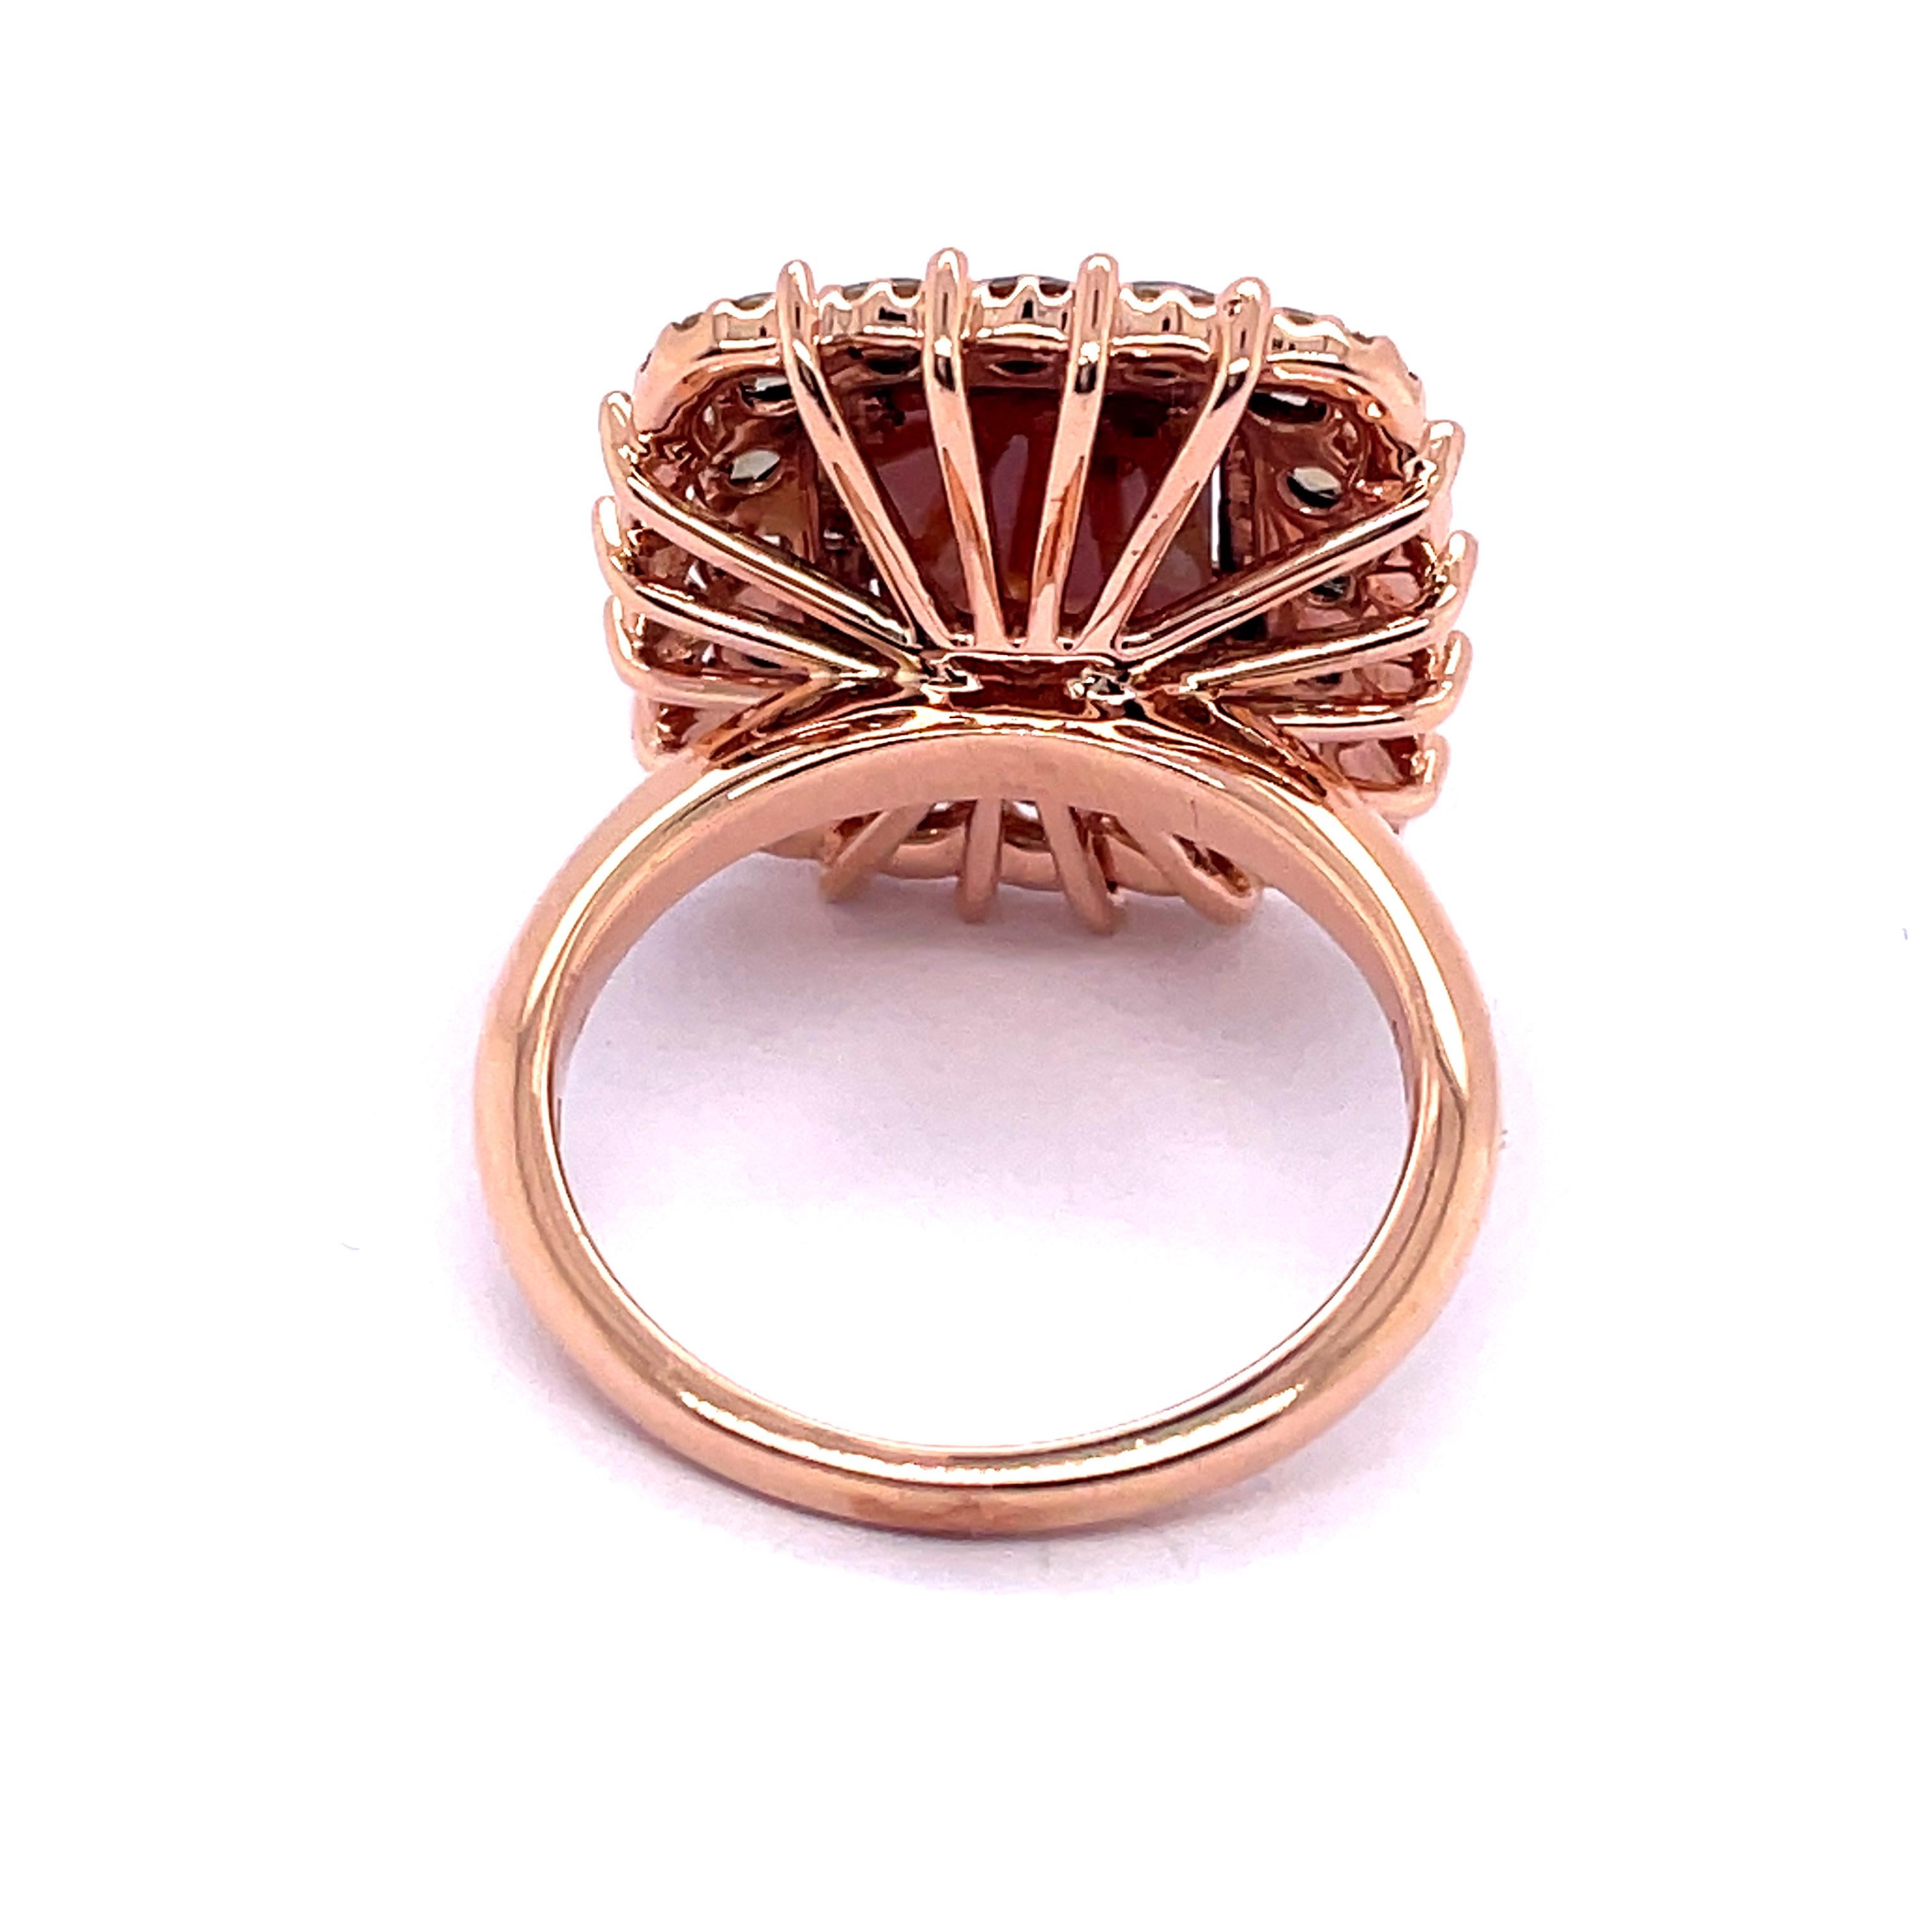 Mixed Cut 14Kt Rose Gold 3.25ct Diamond Cocktail Ring For Sale